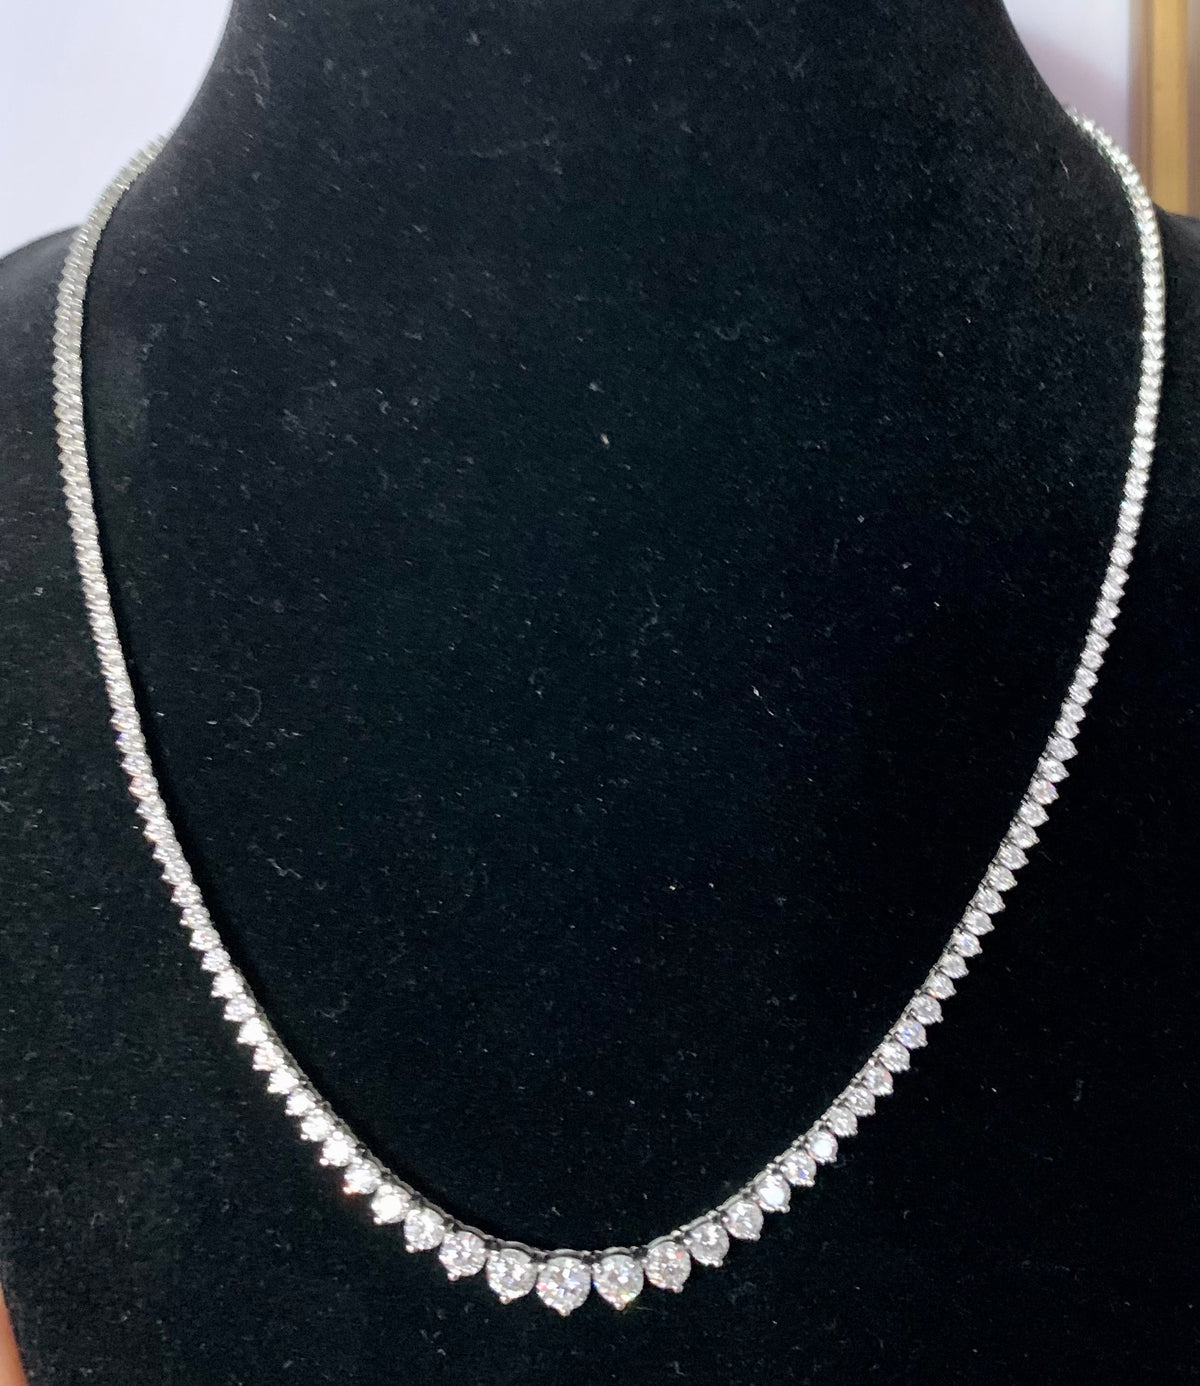 14K White Gold Diamond Riviera 18 inch Necklace with Safety